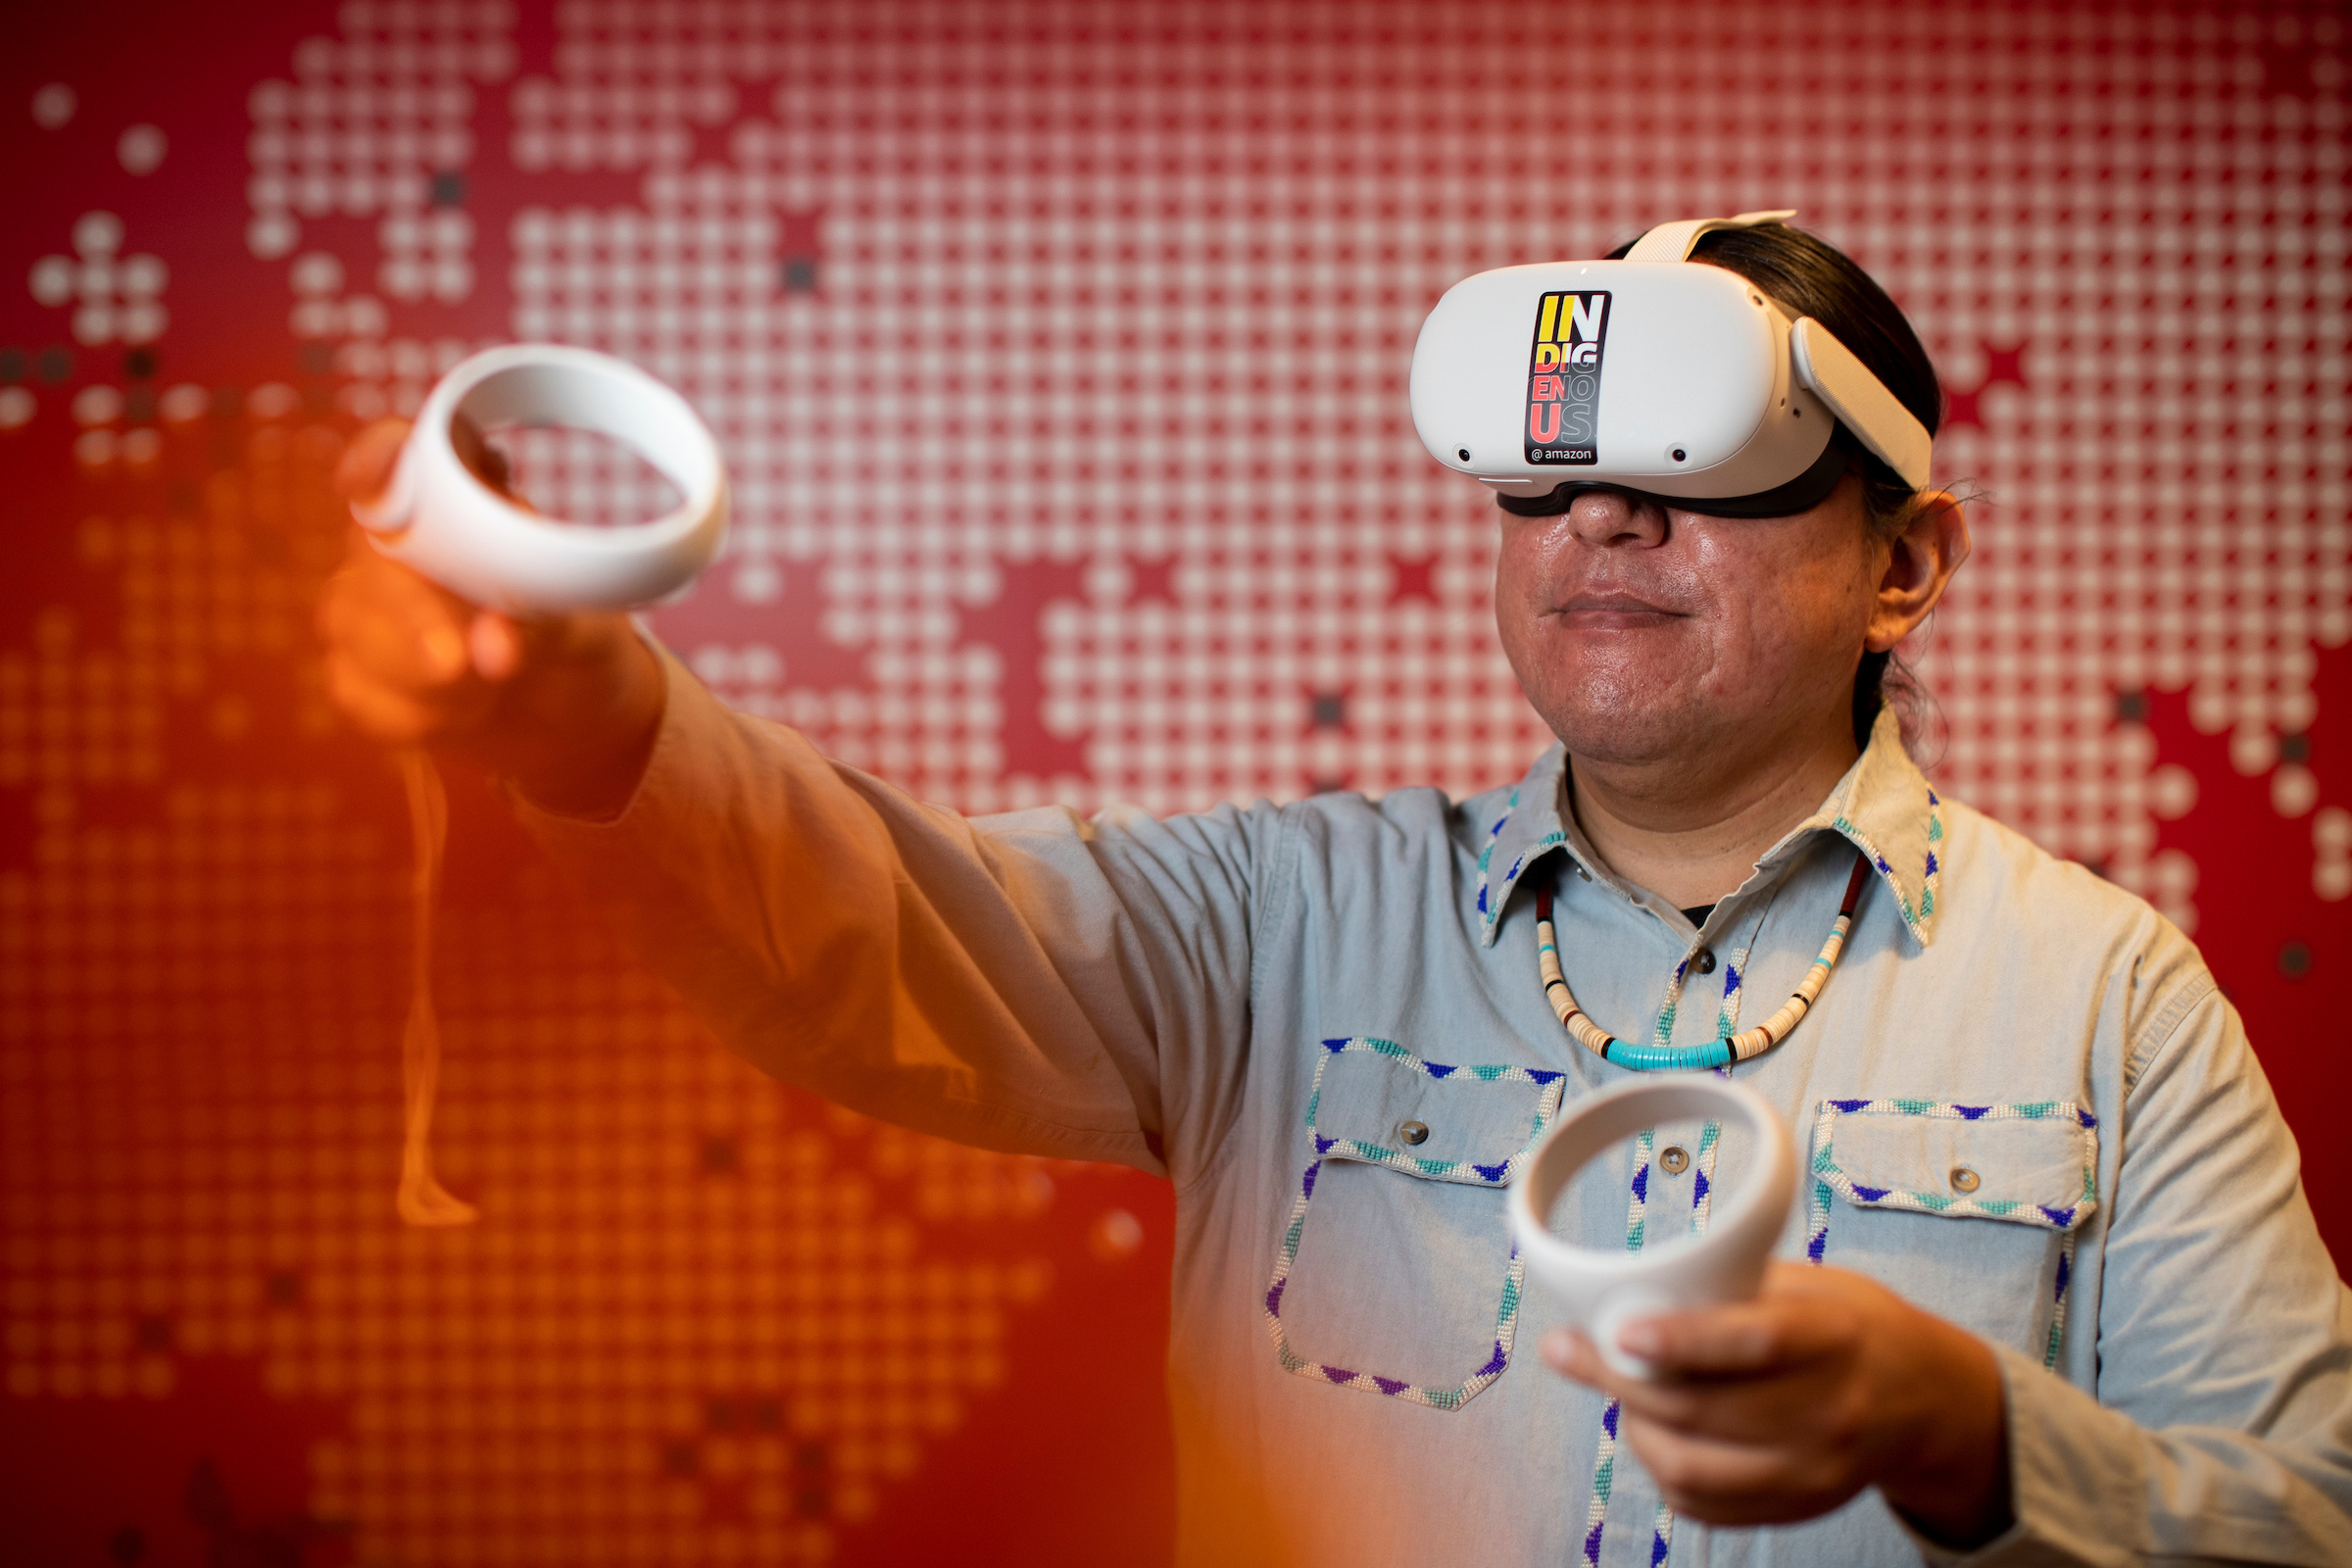 From Atari Games to AR/VR, Michael Running Wolf is Revitalizing Indigenous Languages